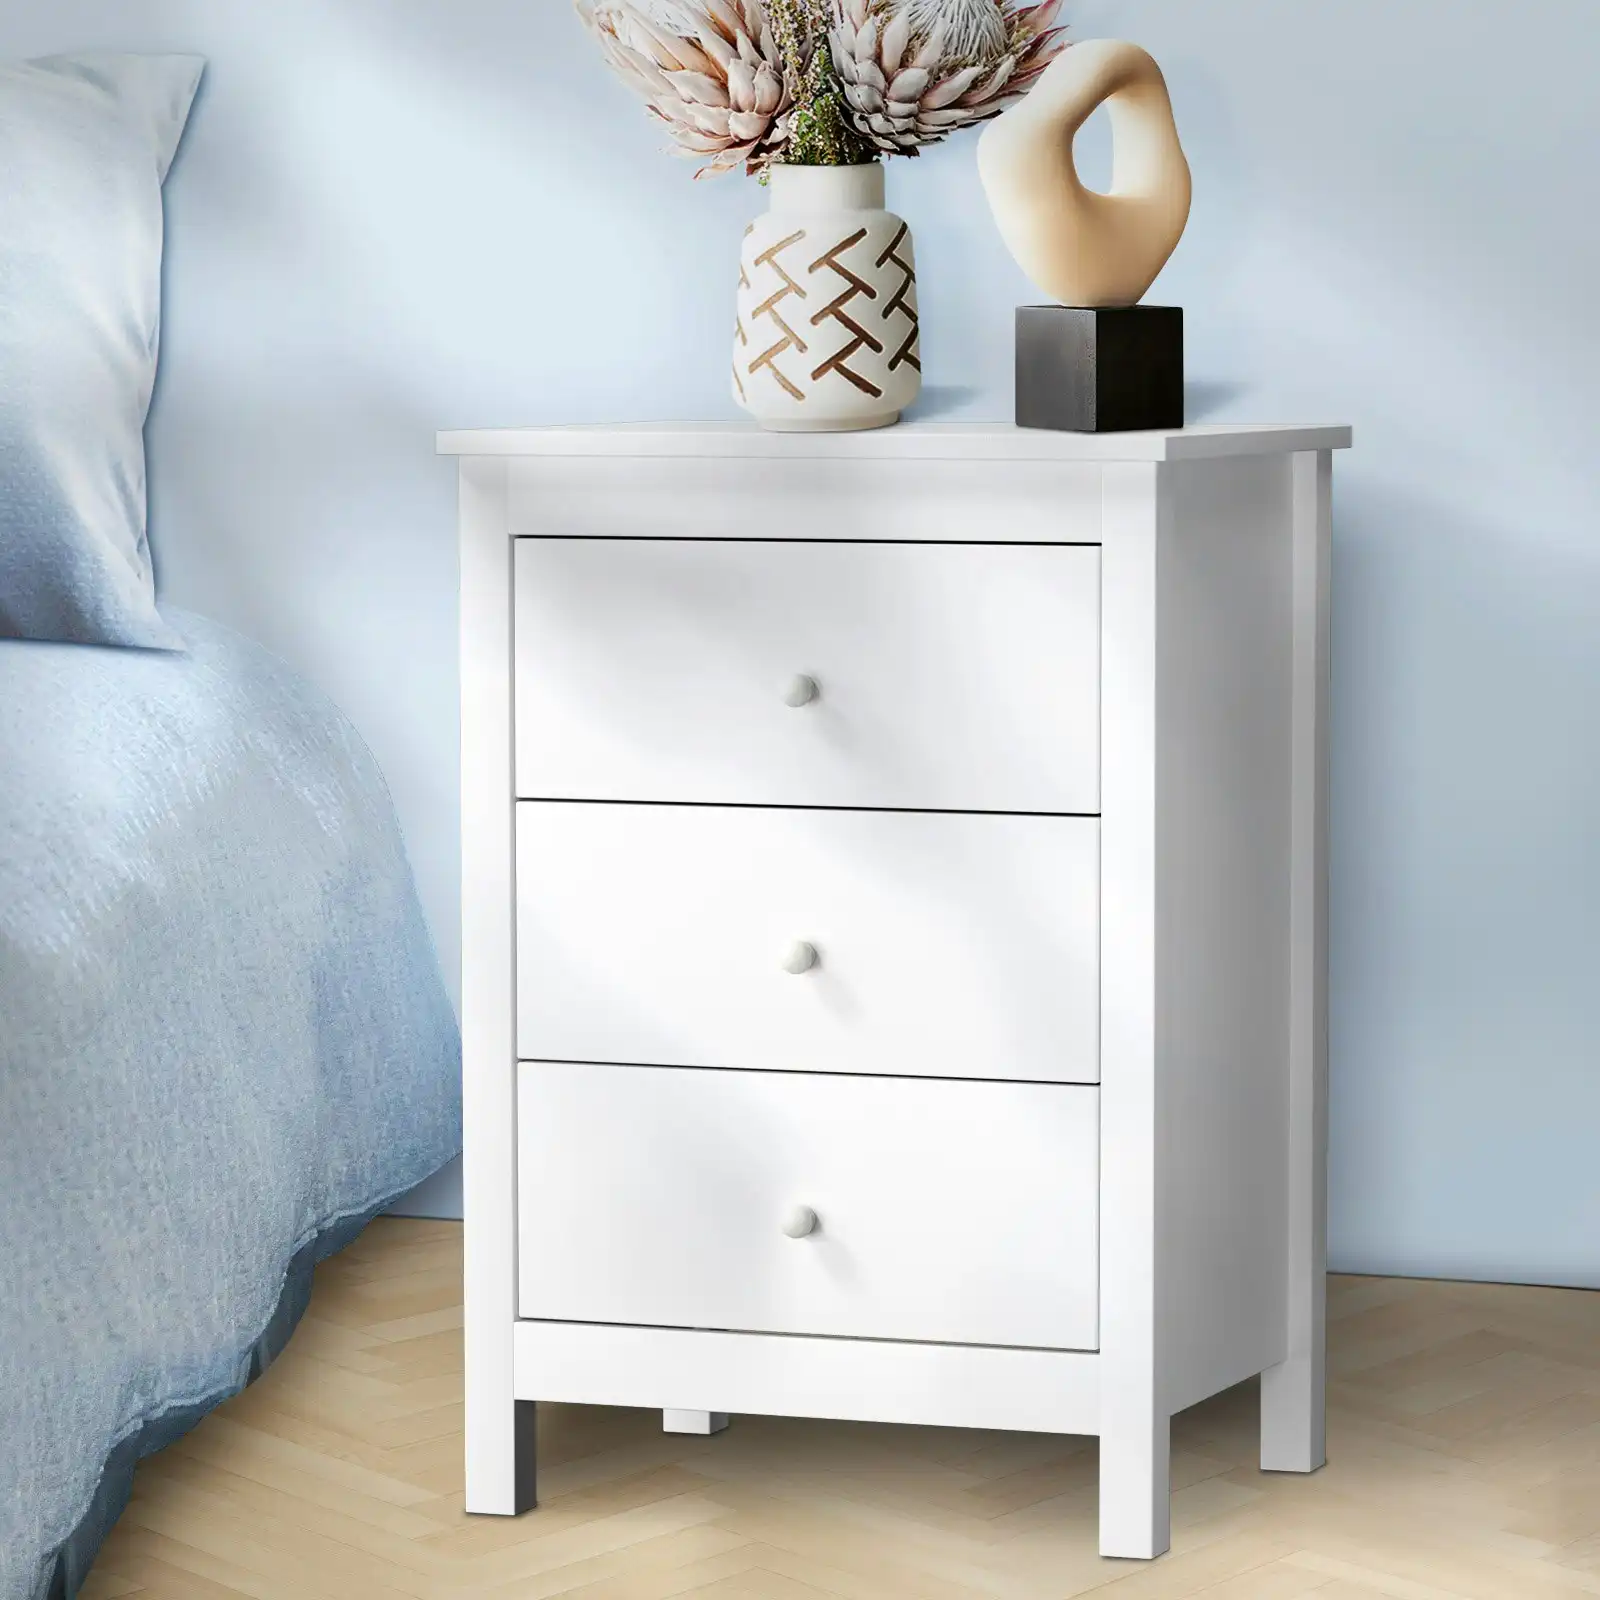 Oikiture Bedside Table 3 Drawers Bedroom Hamptons Furniture Storage Cabinet